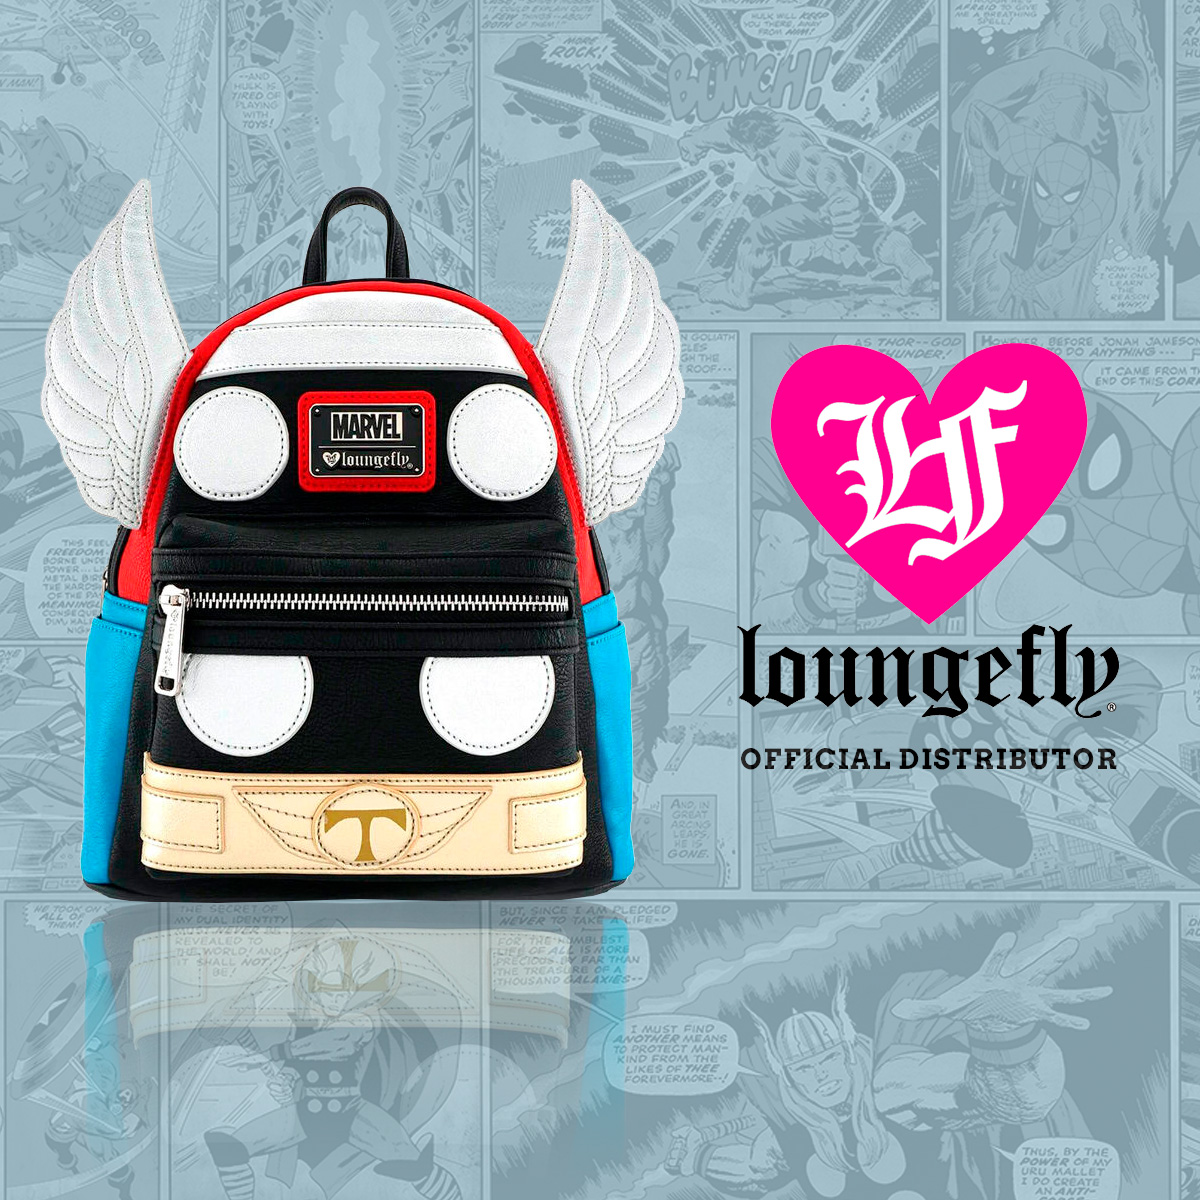 Loungefly Shop